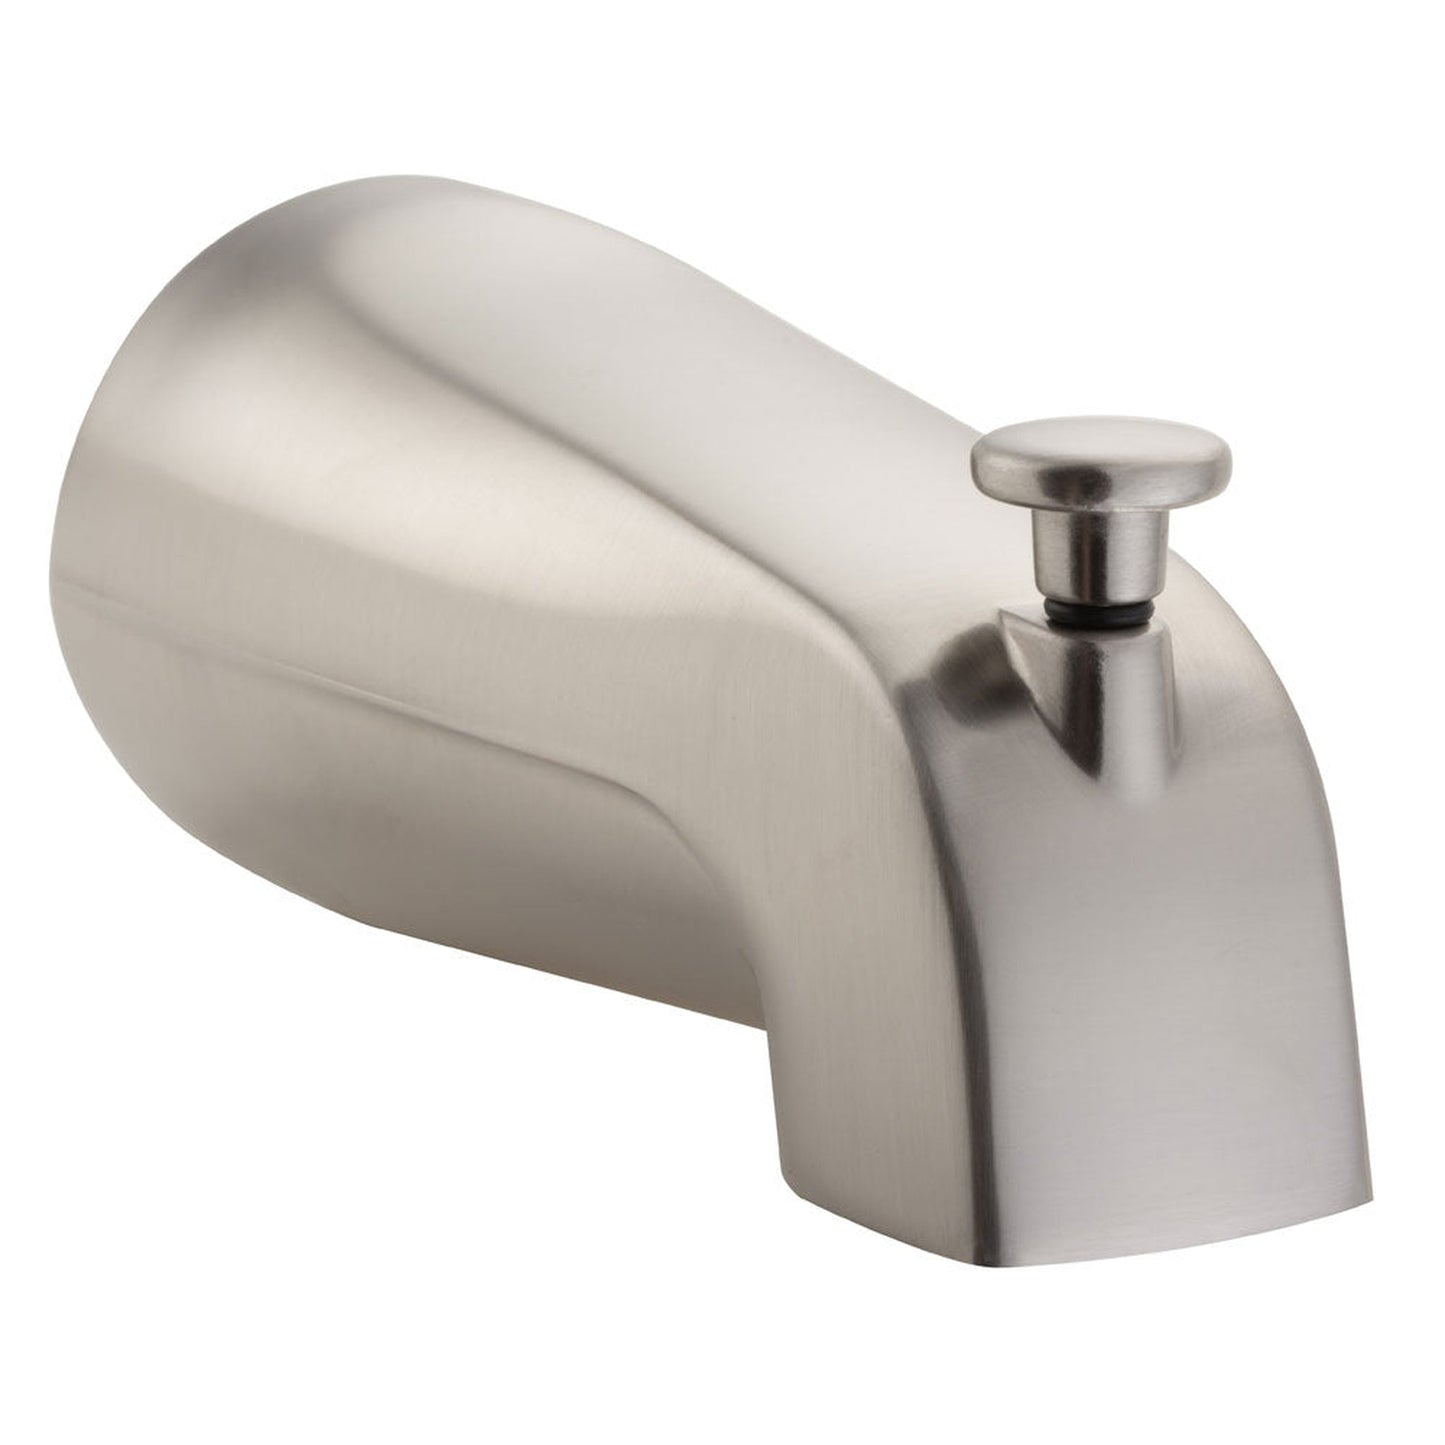 PULSE ShowerSpas Brass Material NPT Connection Tub Spout in Brushed Nickel Finish With Diverter